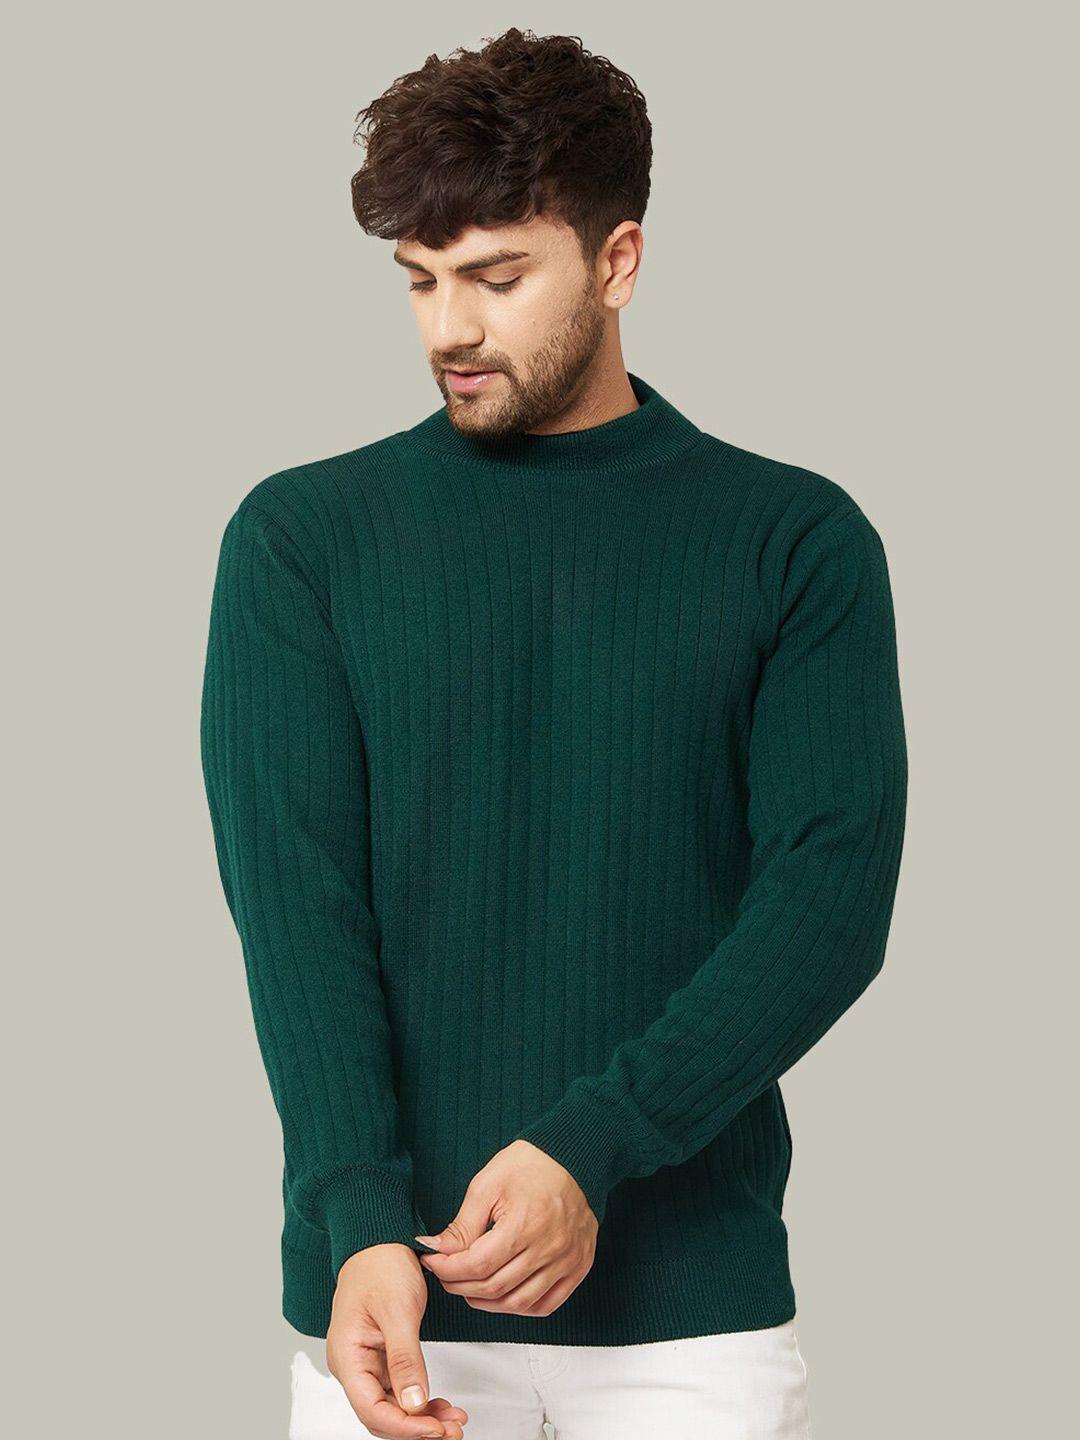 kvetoo ribbed high neck pullover acrylic sweater